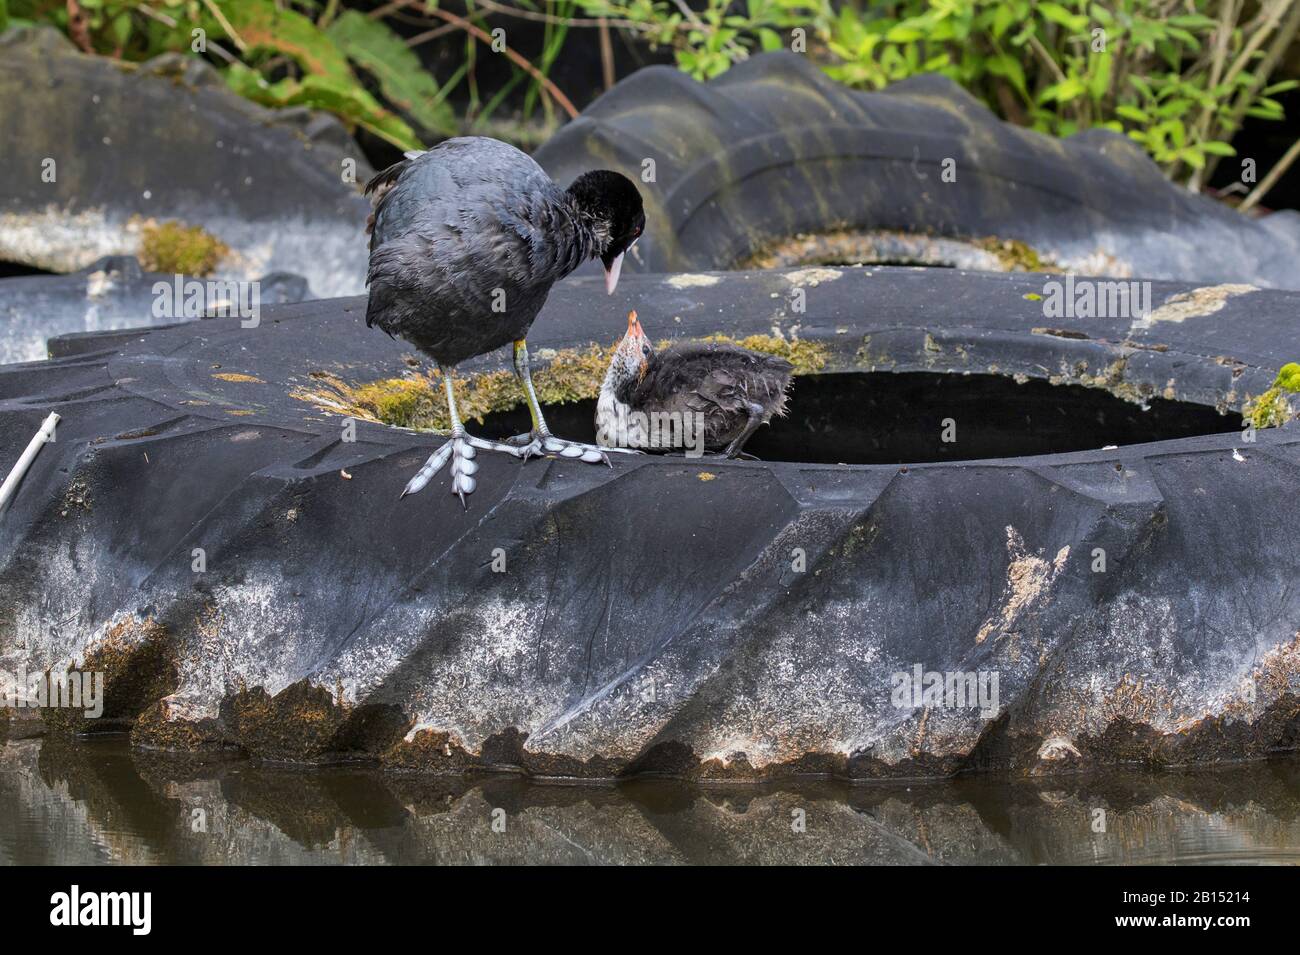 black coot (Fulica atra), with begging fledgling on an old tractor tyre, Germany, Mecklenburg-Western Pomerania Stock Photo